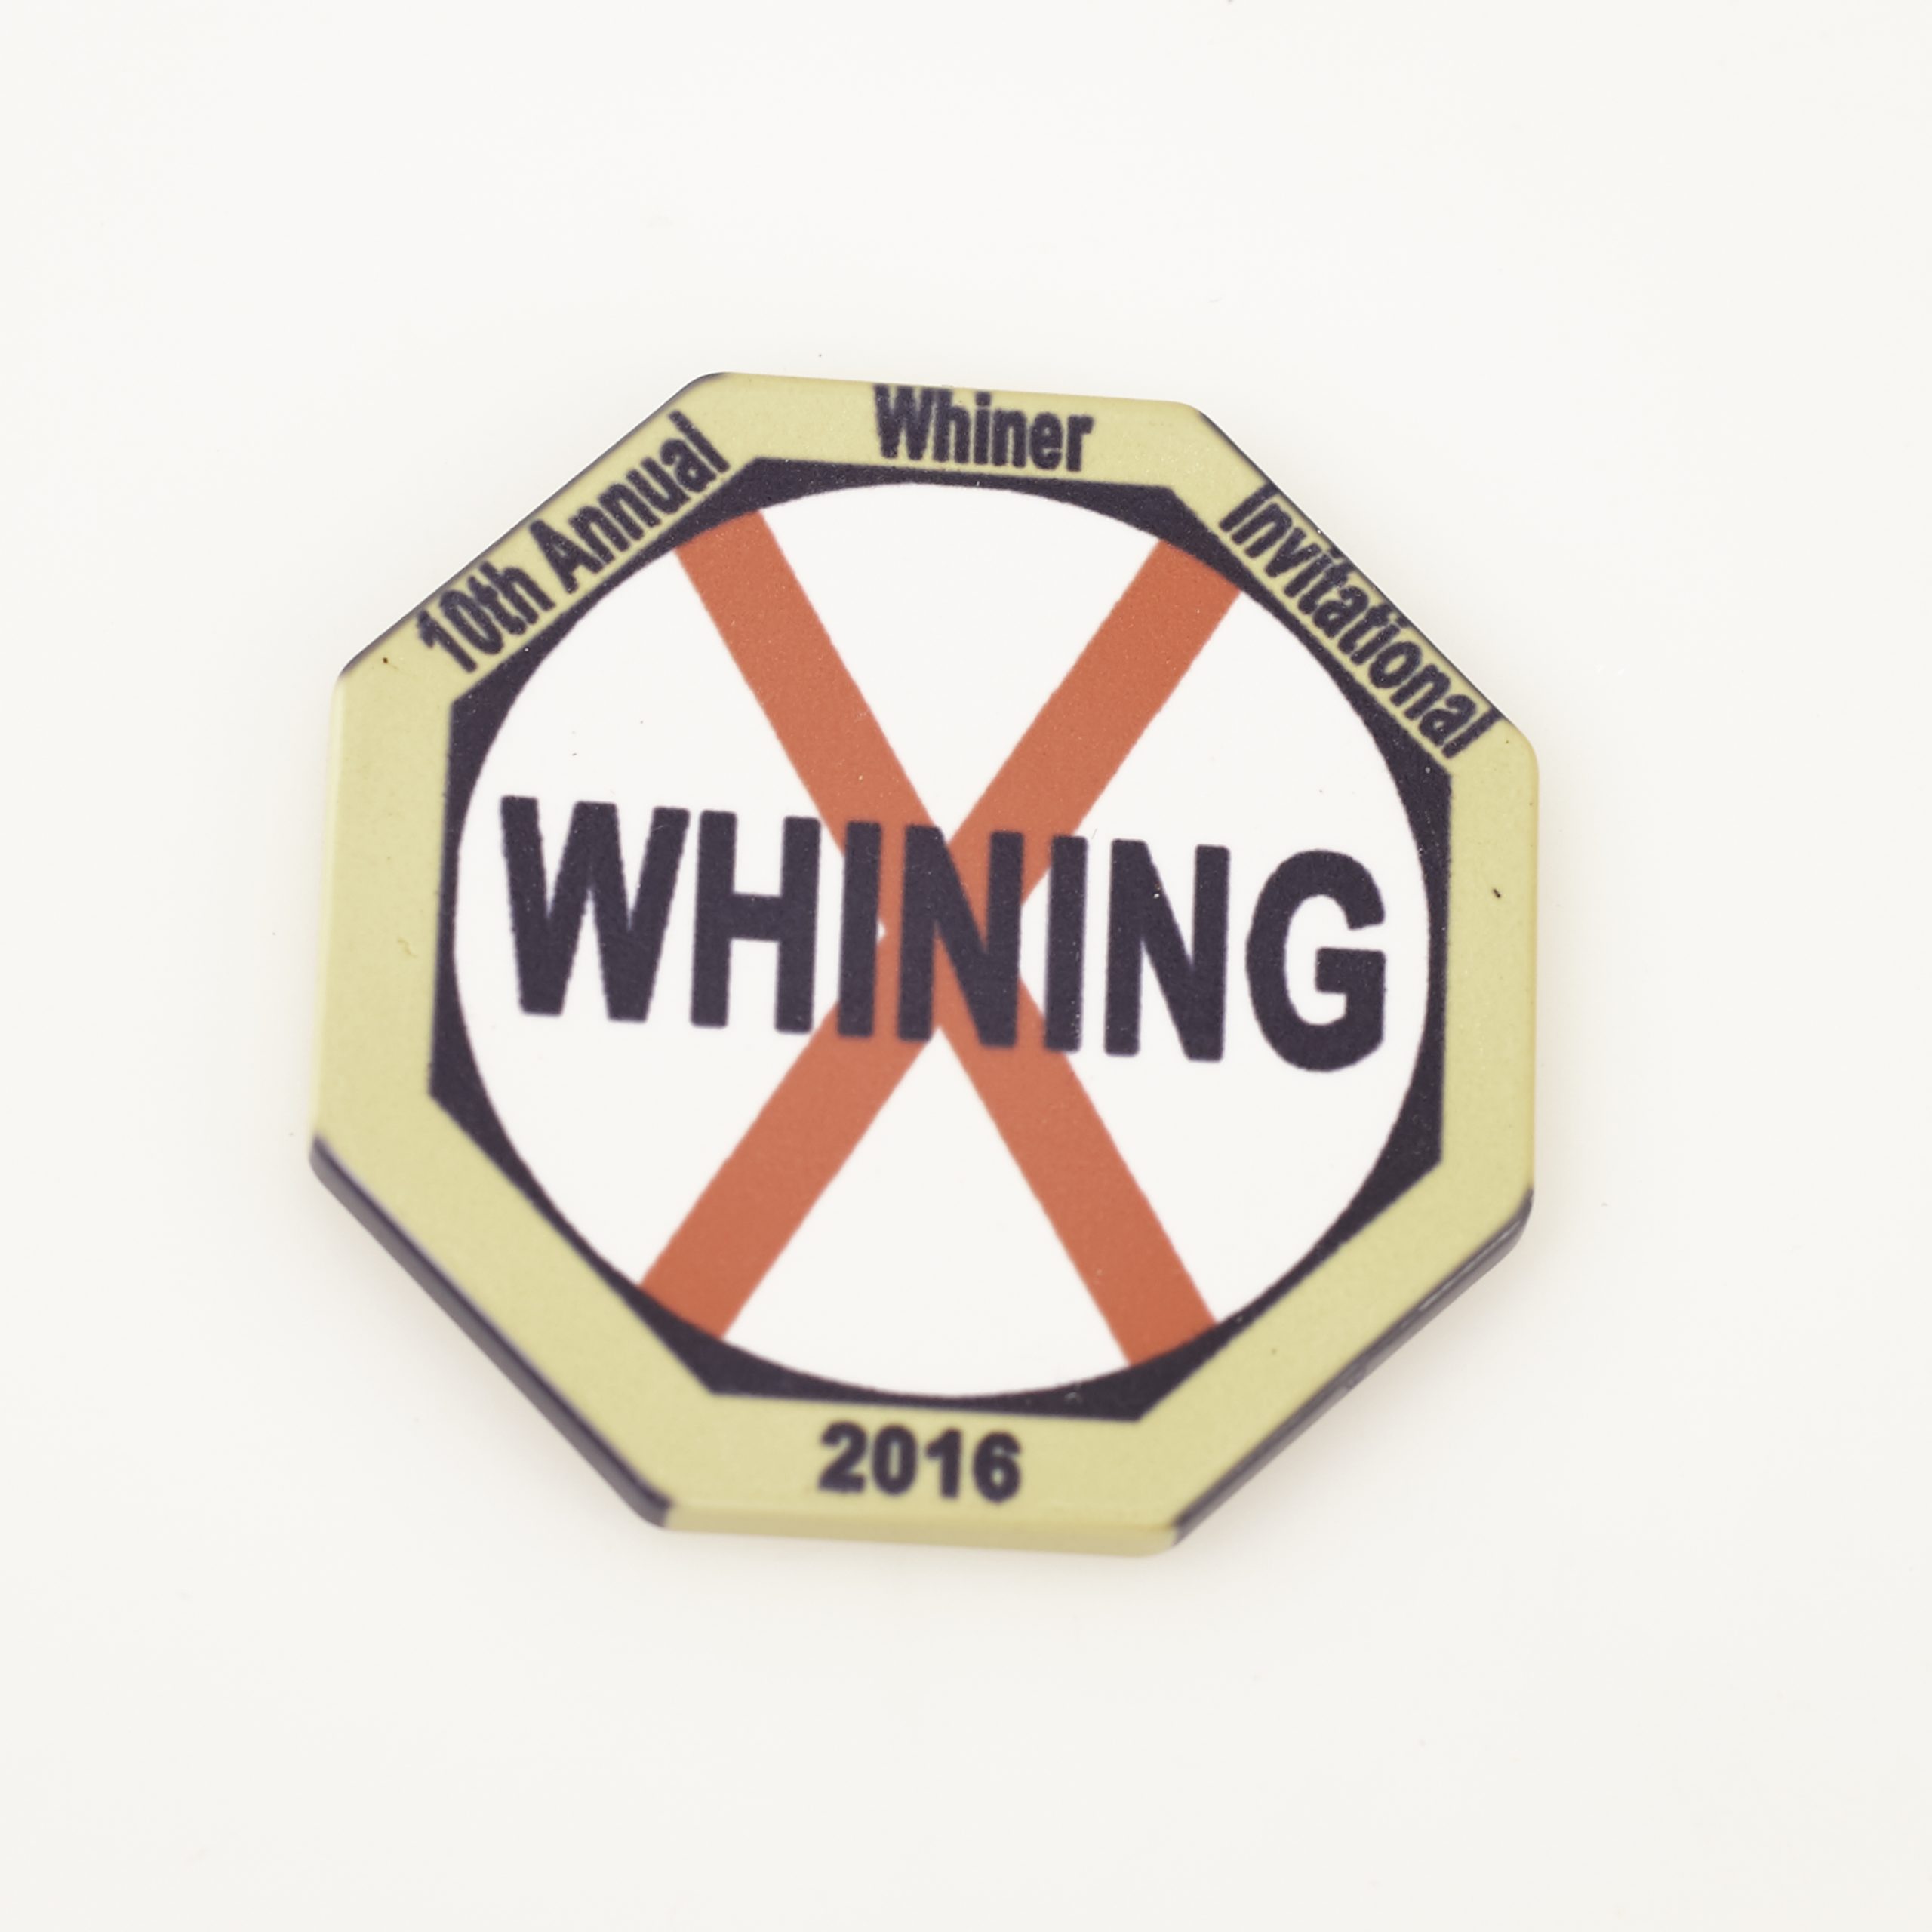 WHINER INVITATIONAL 10th ANNUAL WHINING, Poker Card Guard